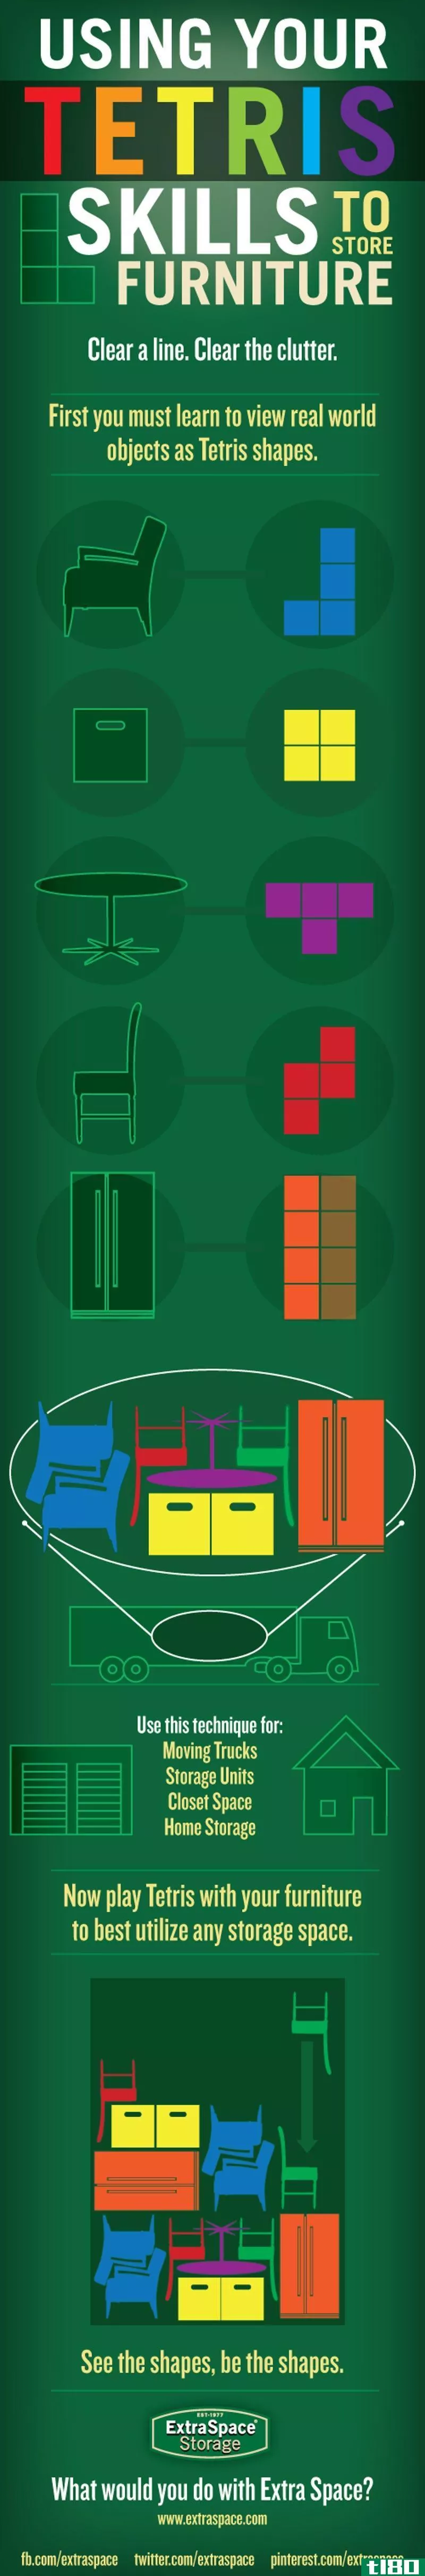 Illustration for article titled Store Furniture Using Skills from Tetris